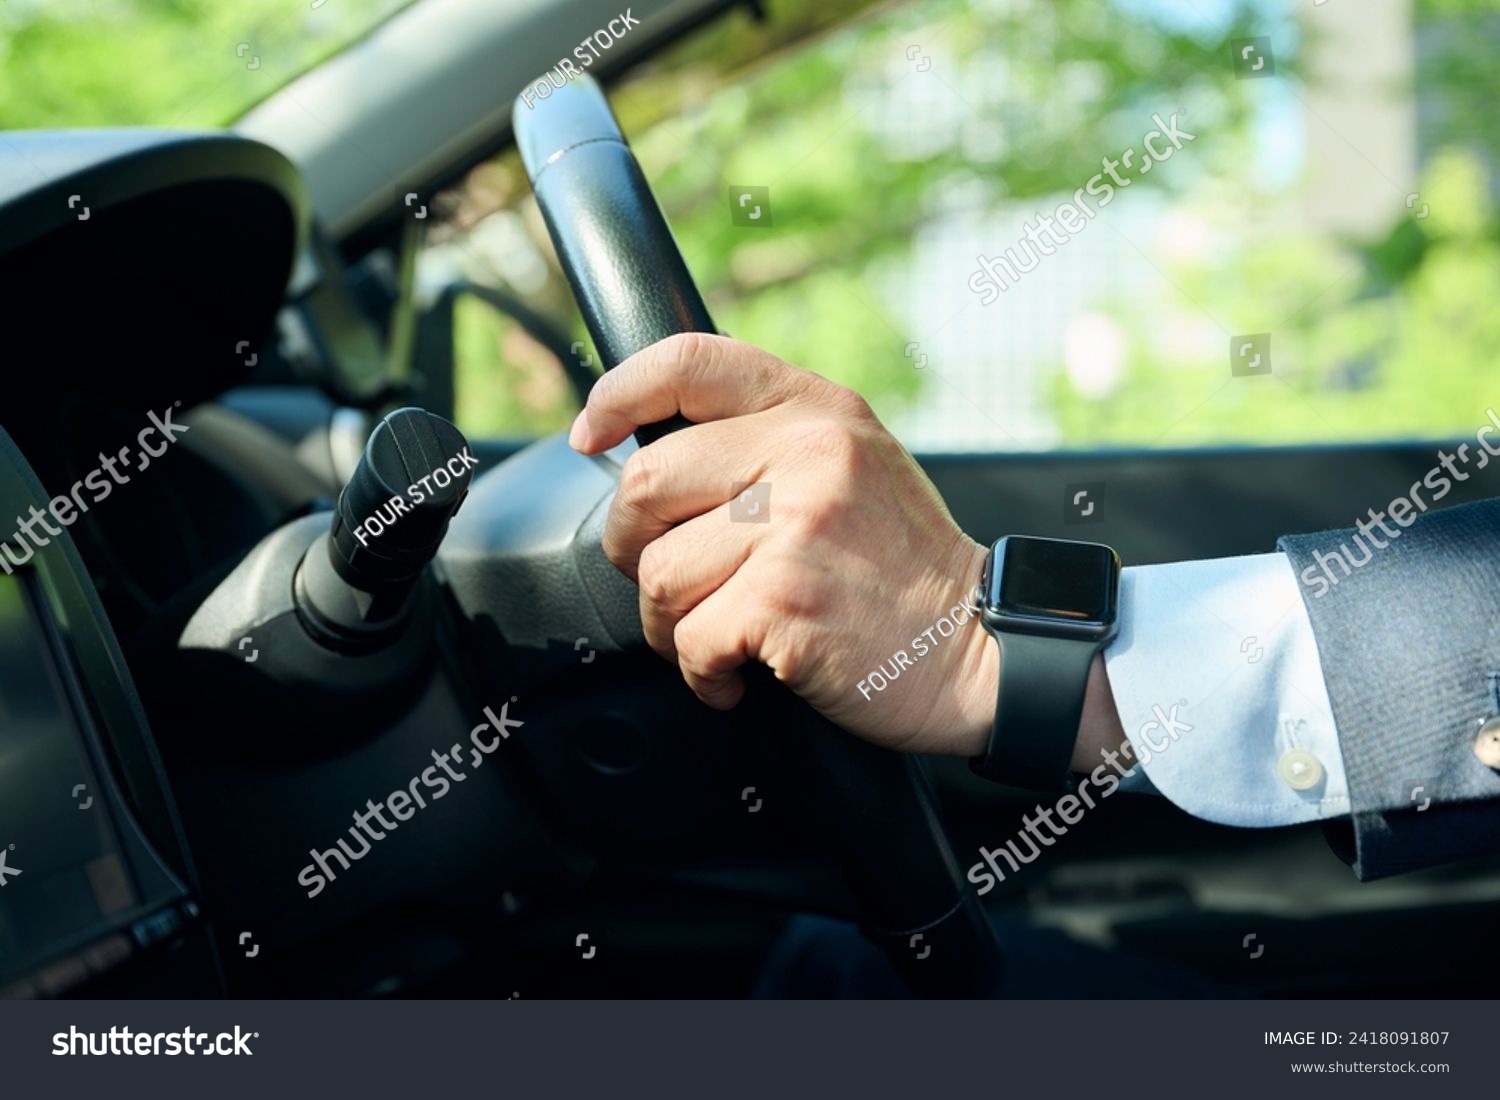 An office worker in his 50s gripping the steering wheel #2418091807